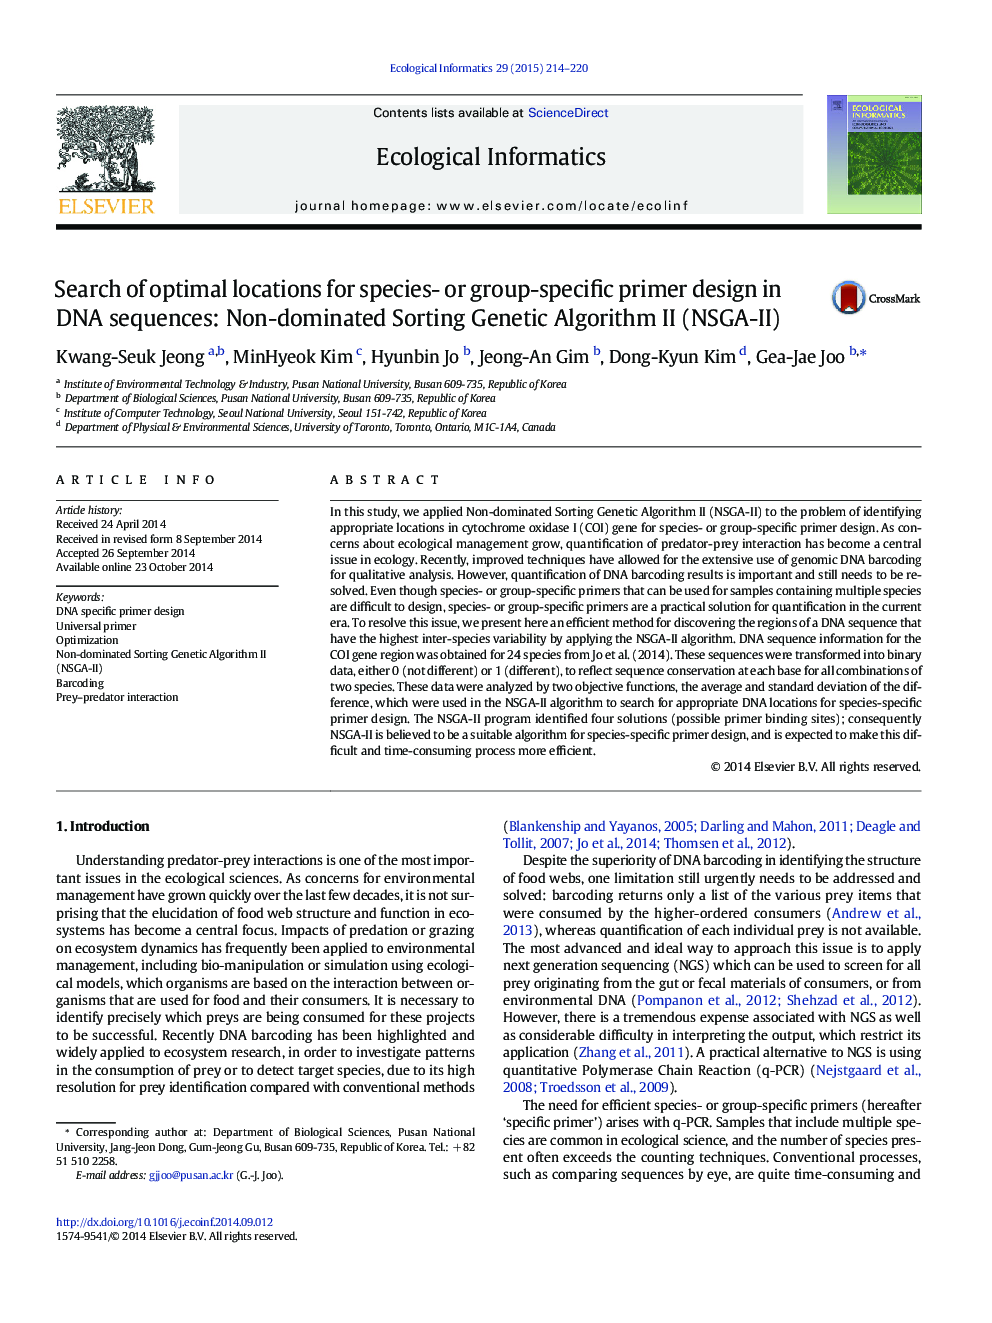 Search of optimal locations for species- or group-specific primer design in DNA sequences: Non-dominated Sorting Genetic Algorithm II (NSGA-II)